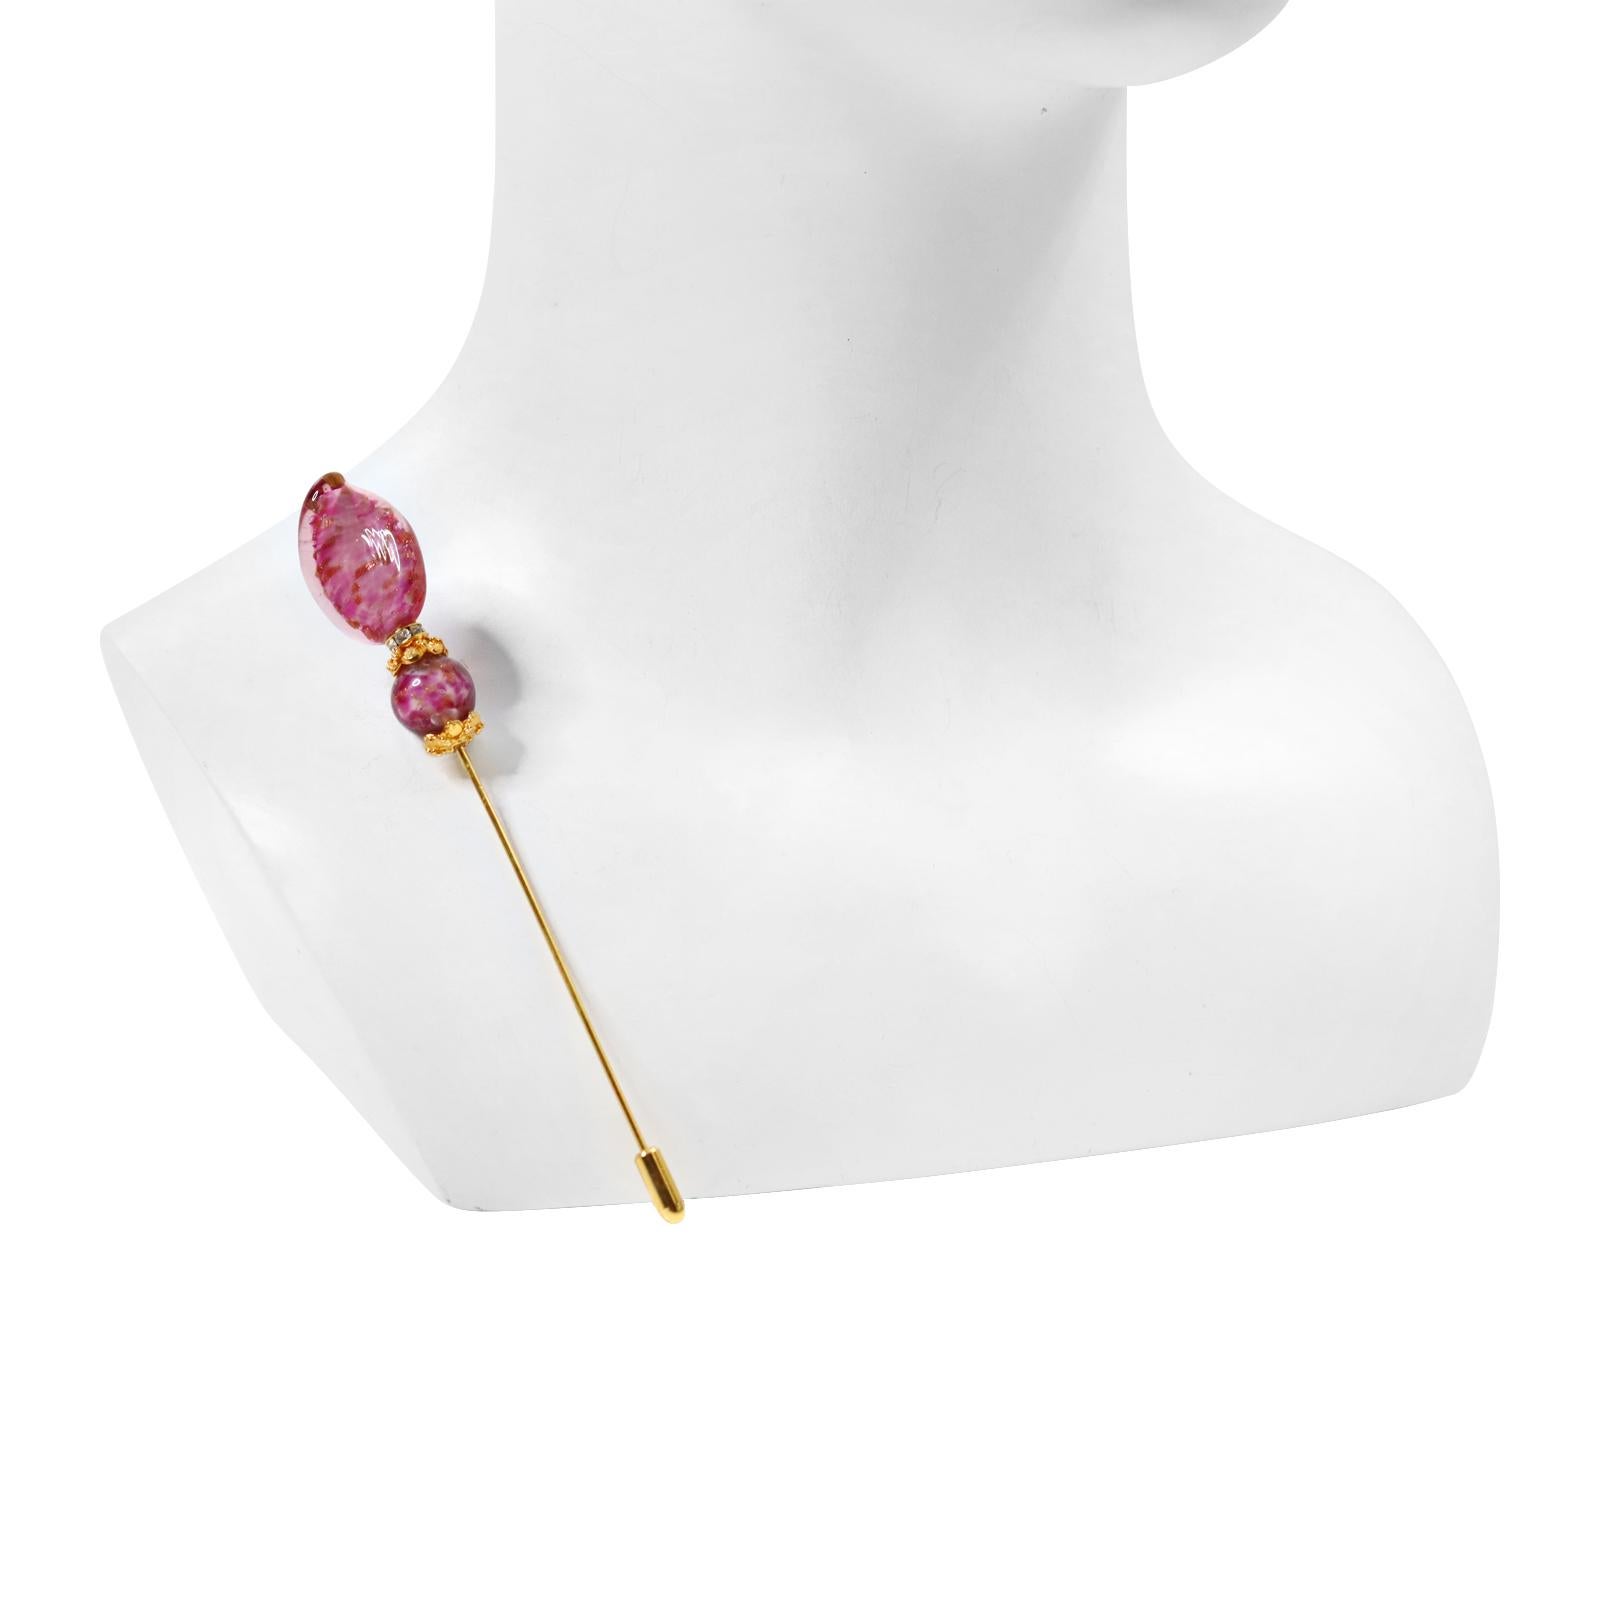 Vintage Pink Stone with Diamante in Gold Tone Lapel Pin Brooch, circa 1990s In Good Condition For Sale In New York, NY